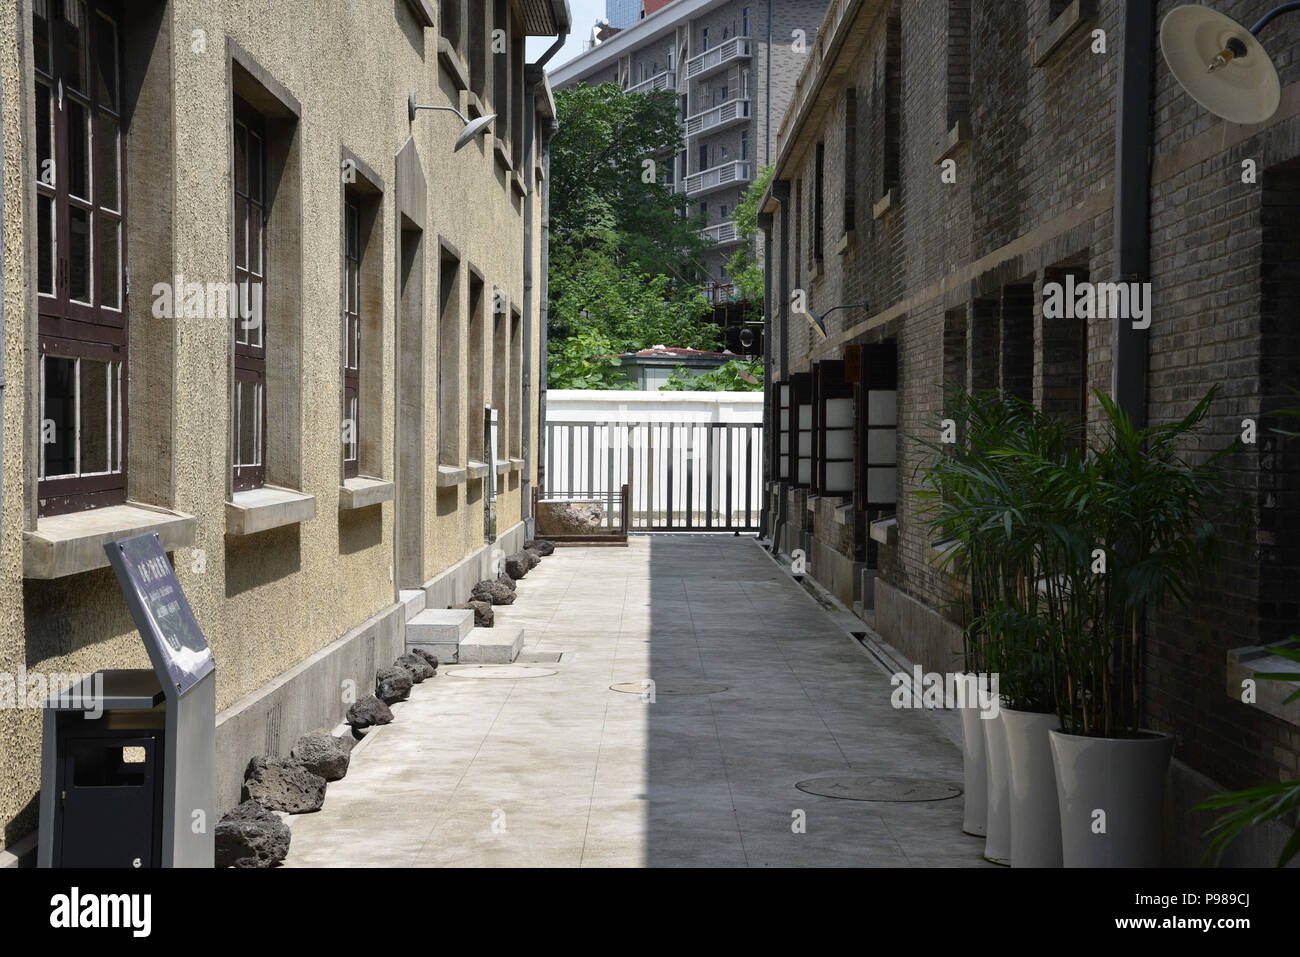 July 16, 2018 - Nanjin, Nanjin, China - Nanjing, CHINA-The Liji Alley Comfort Women Museum, located in Nanjing, east China's Jiangsu Province, is the largest former site of comfort women in Asia.The Liji Alley Comfort Women Museum, Nanjing, has begun to collate information on military brothels, or ''comfort stations, '' established by the Japanese invaders during its occupation of the eastern city during World War II. The investigation will result in a comprehensive record of Japan's war crimes, according to museum curator Su Zhiliang, and the evidence will be used as supporting documentation  Stock Photo